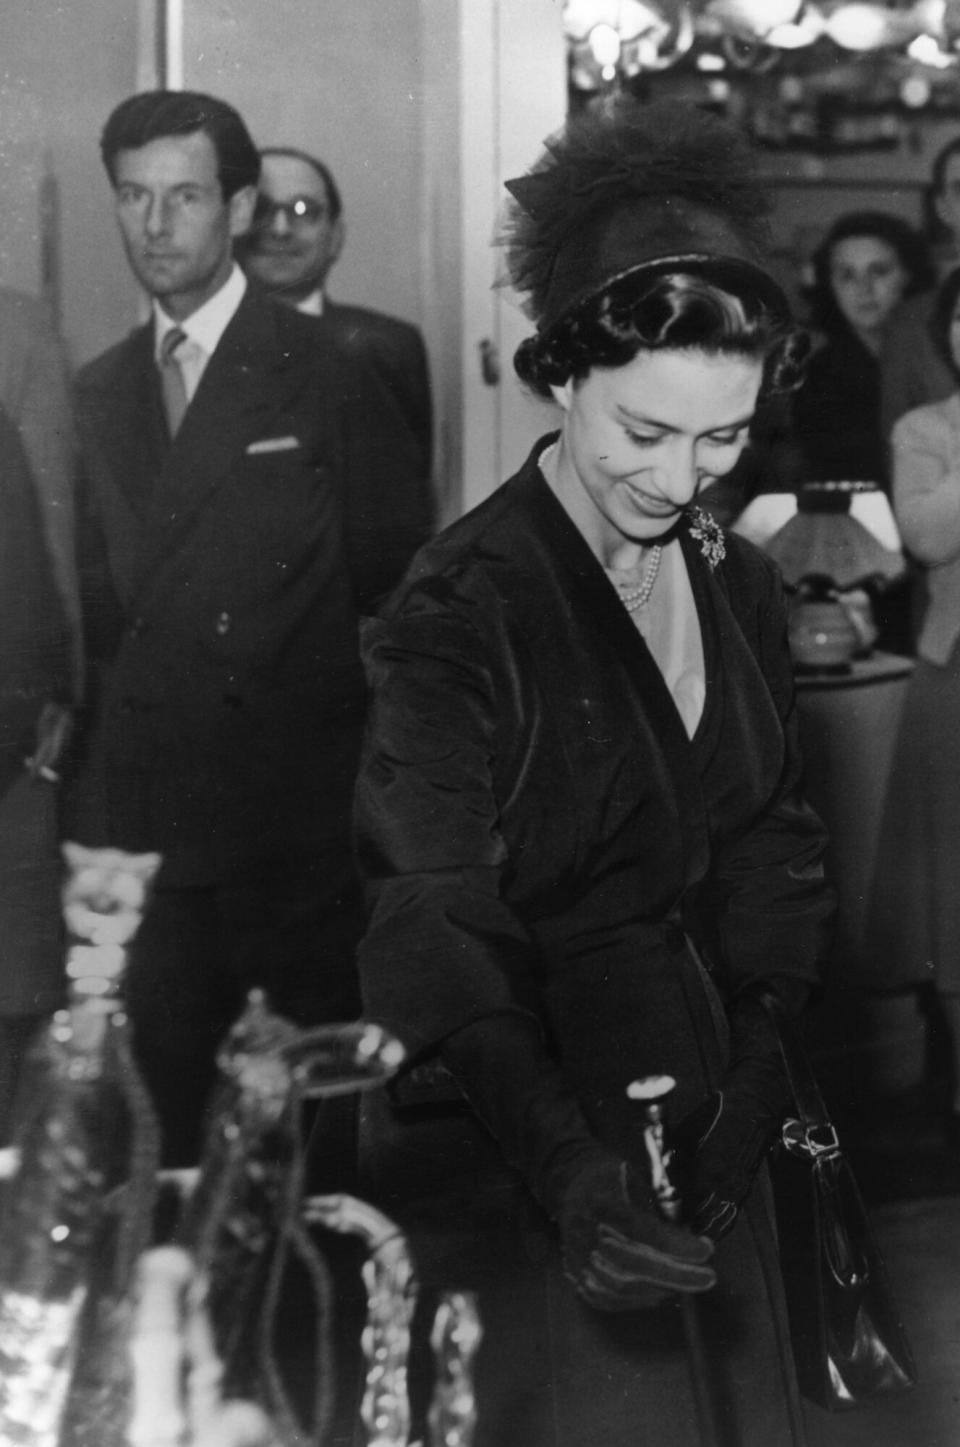 Princess Margaret (1930 - 2002) at the British Industries Fair at Olympia, London. Captain Peter Townsend, the divorced Royal Air Force captain she was later refused permission to marry, stands in the background